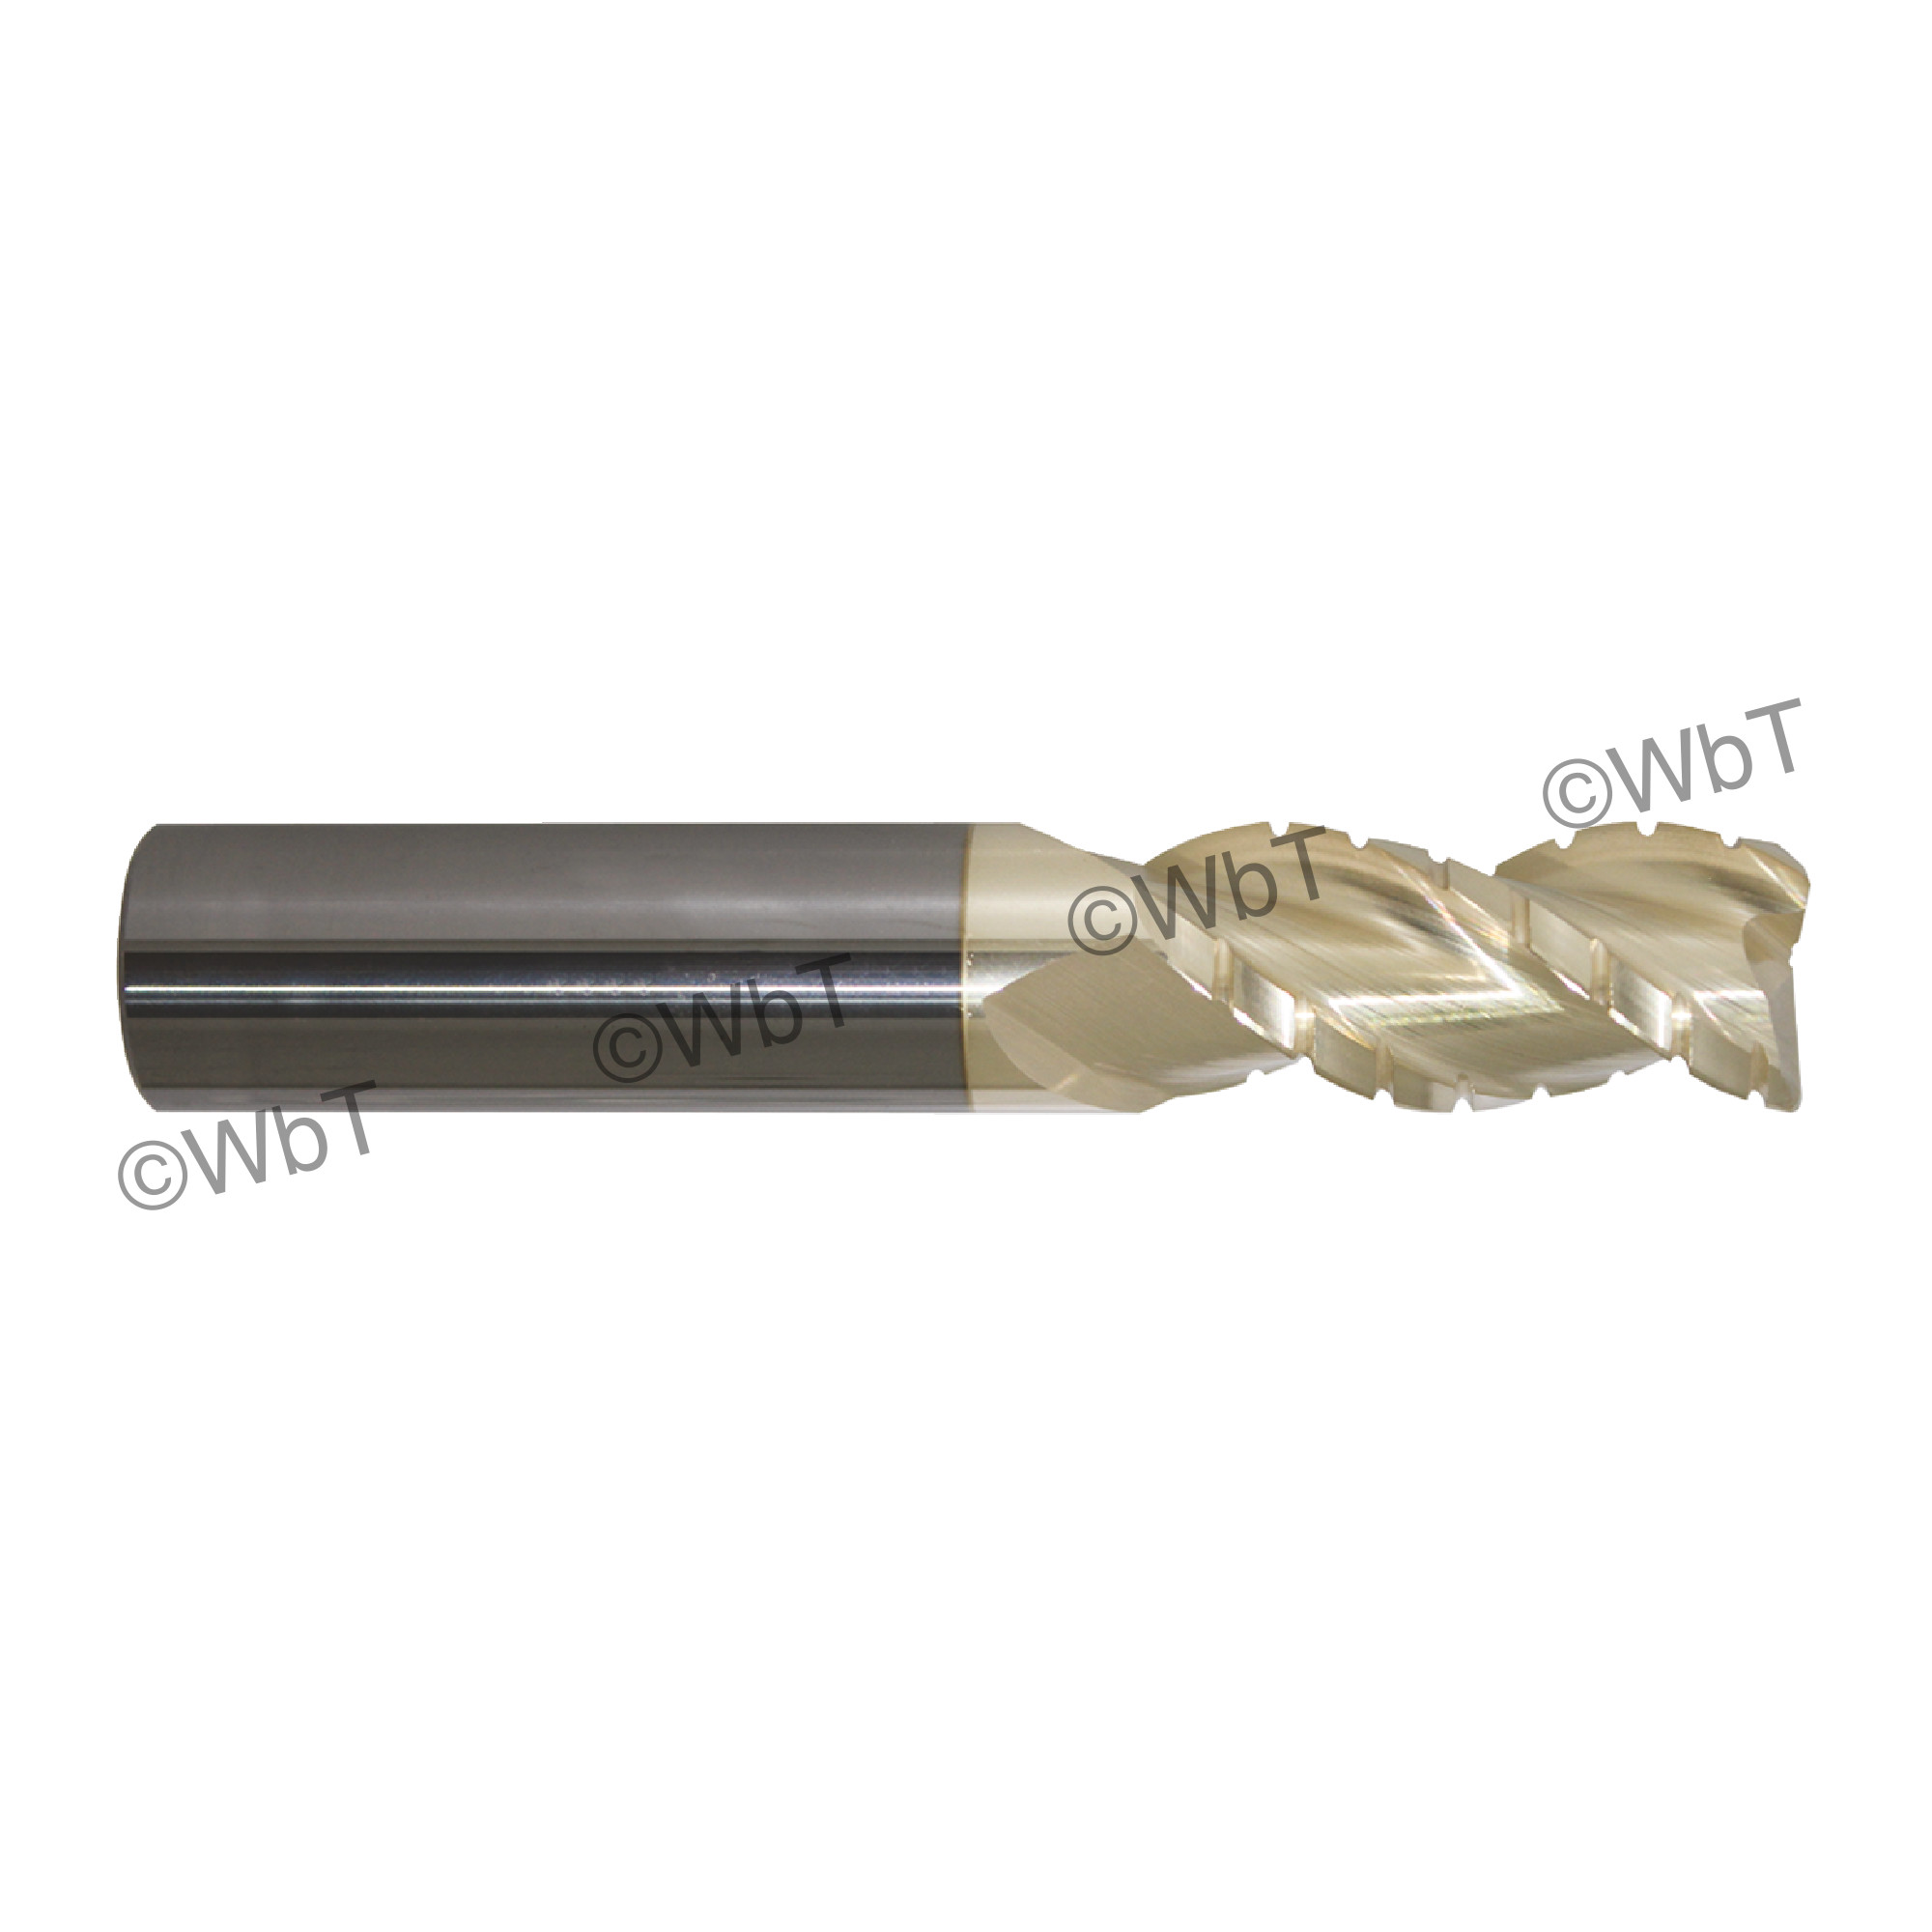 Promax Solid Carbide 3 Flute Roughing-Finishing Corner Radius End Mill 1/8" 119-00826 Series 119